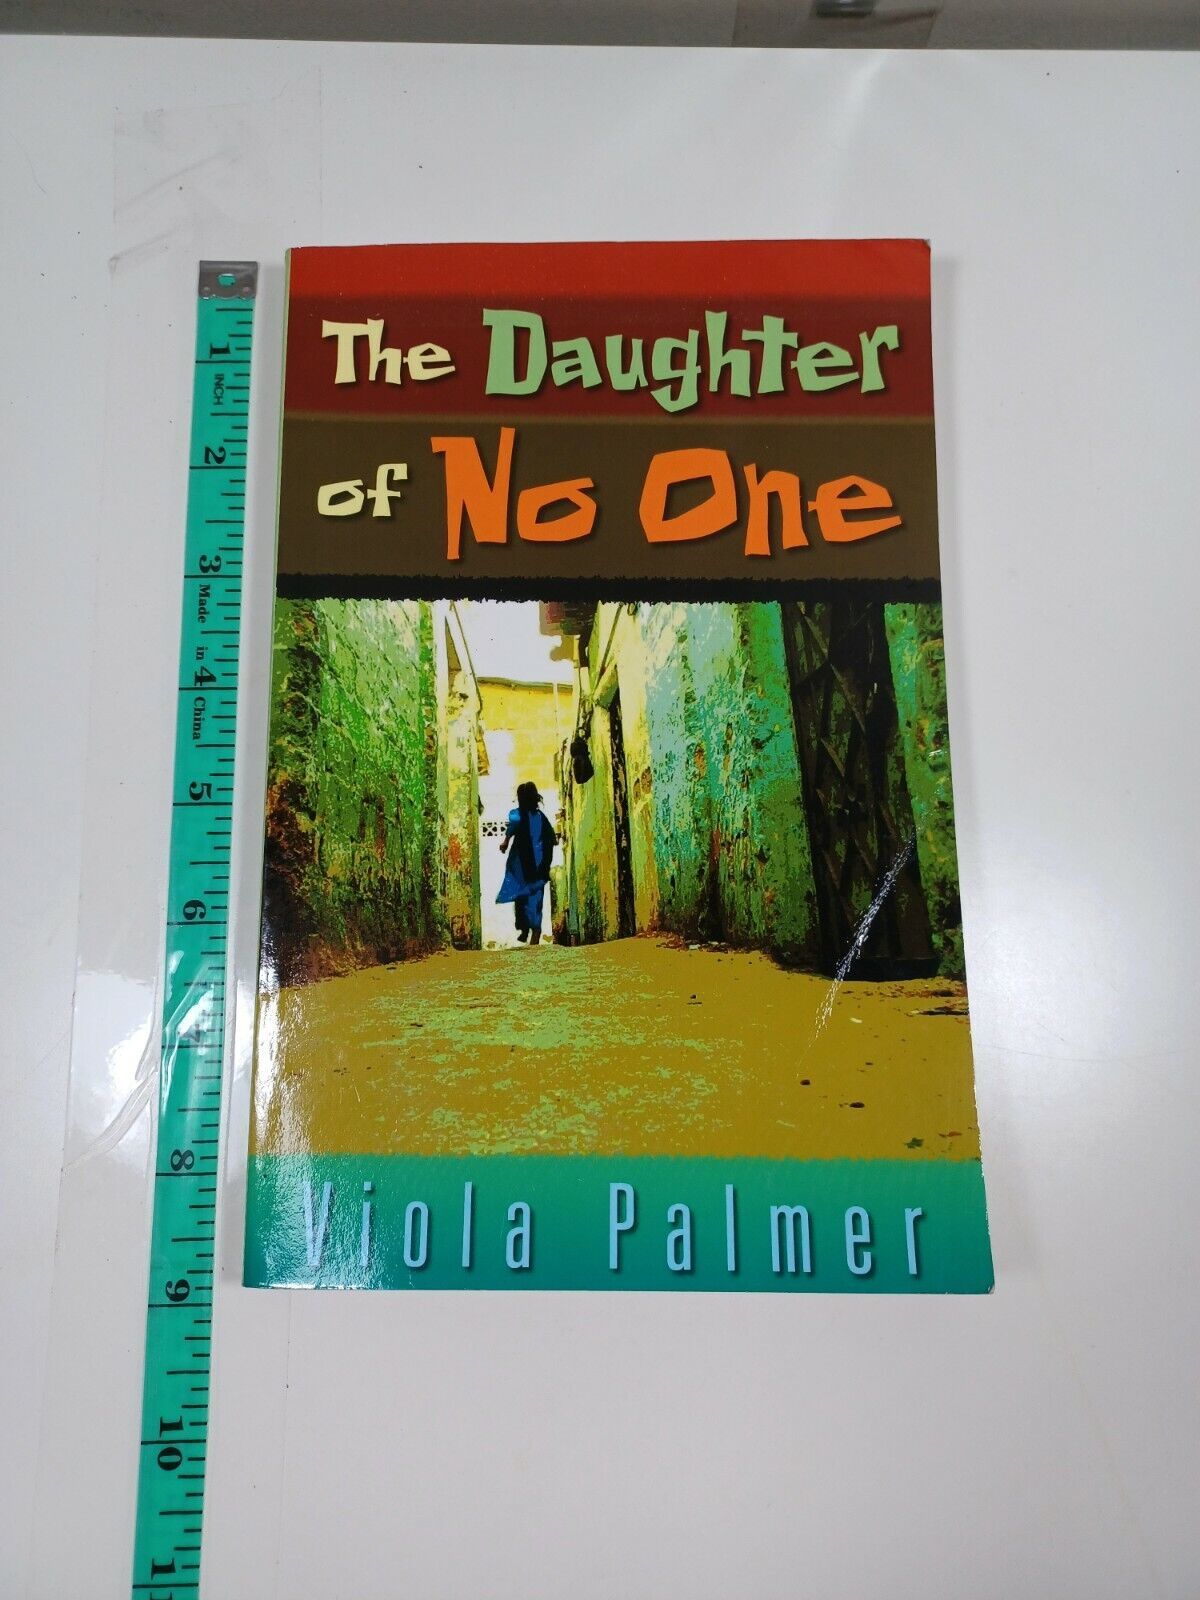 Primary image for the daughter of no one by viola palmer 2008 paperback